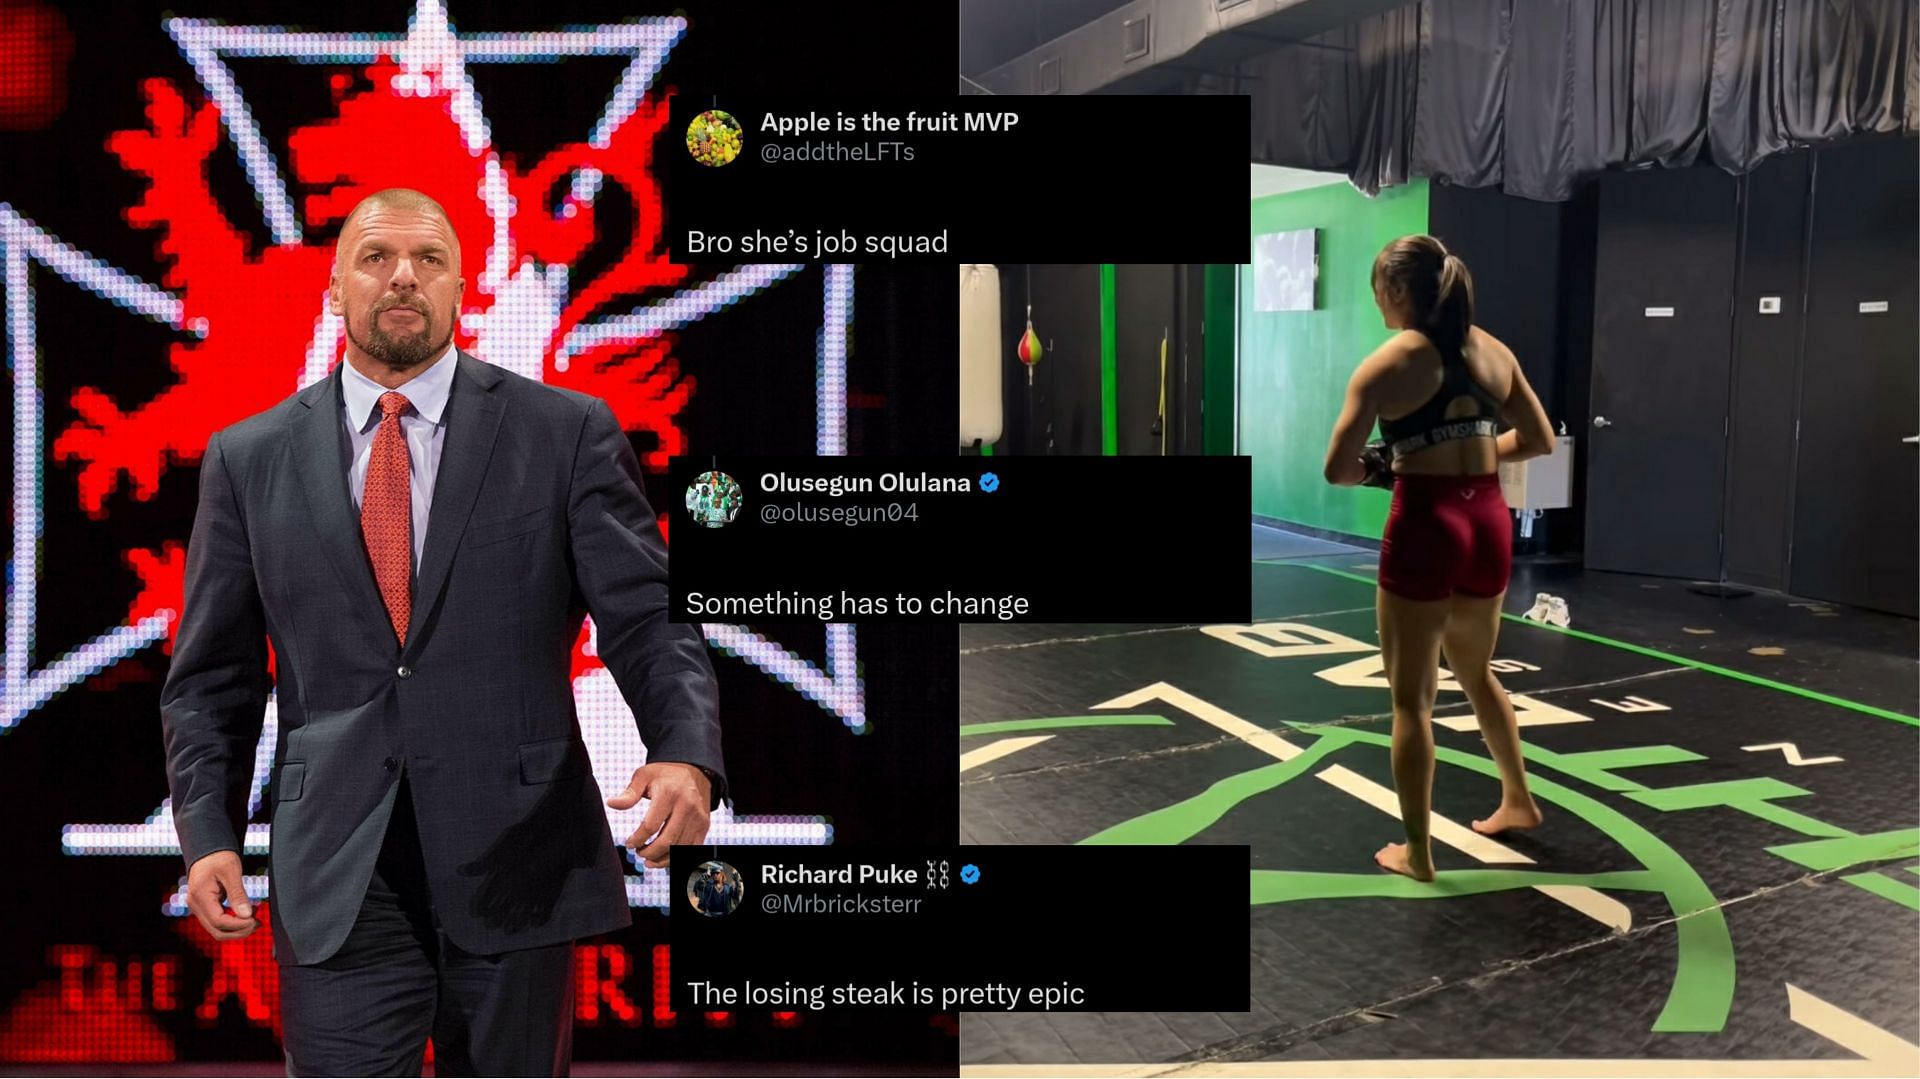 Triple H is the WWE Chief Content Officer!